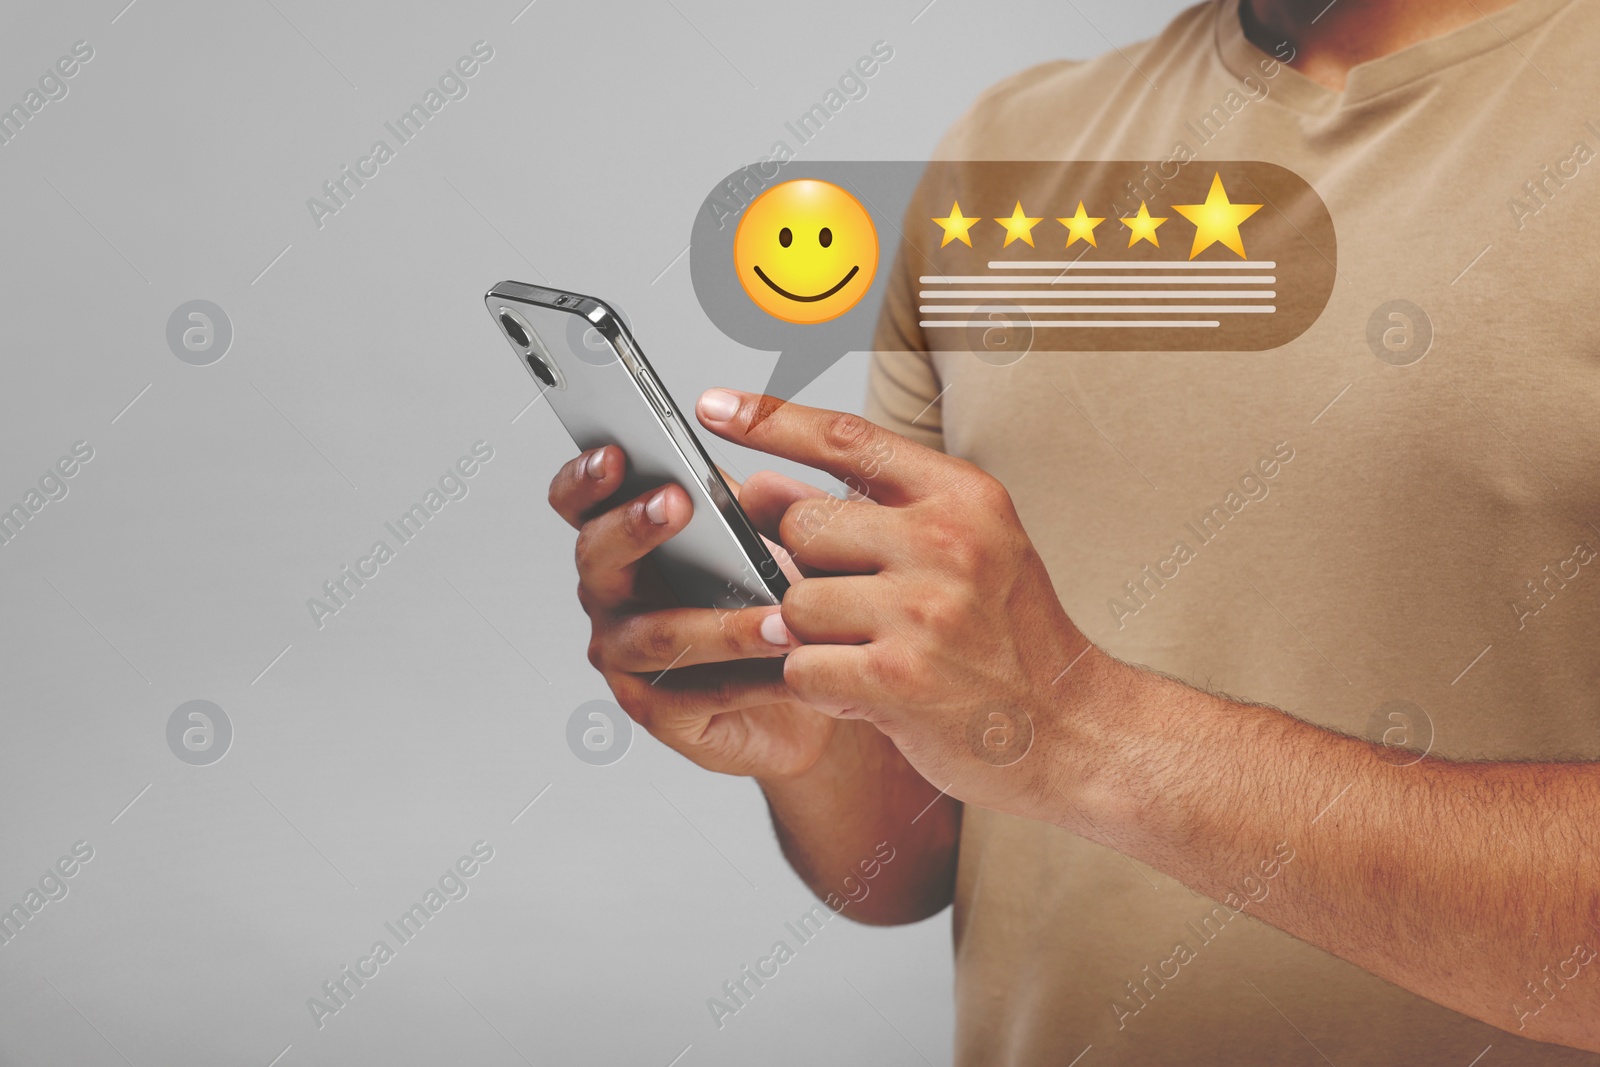 Image of Man leaving service feedback with smartphone on light background, closeup. Stars and emoticon over device